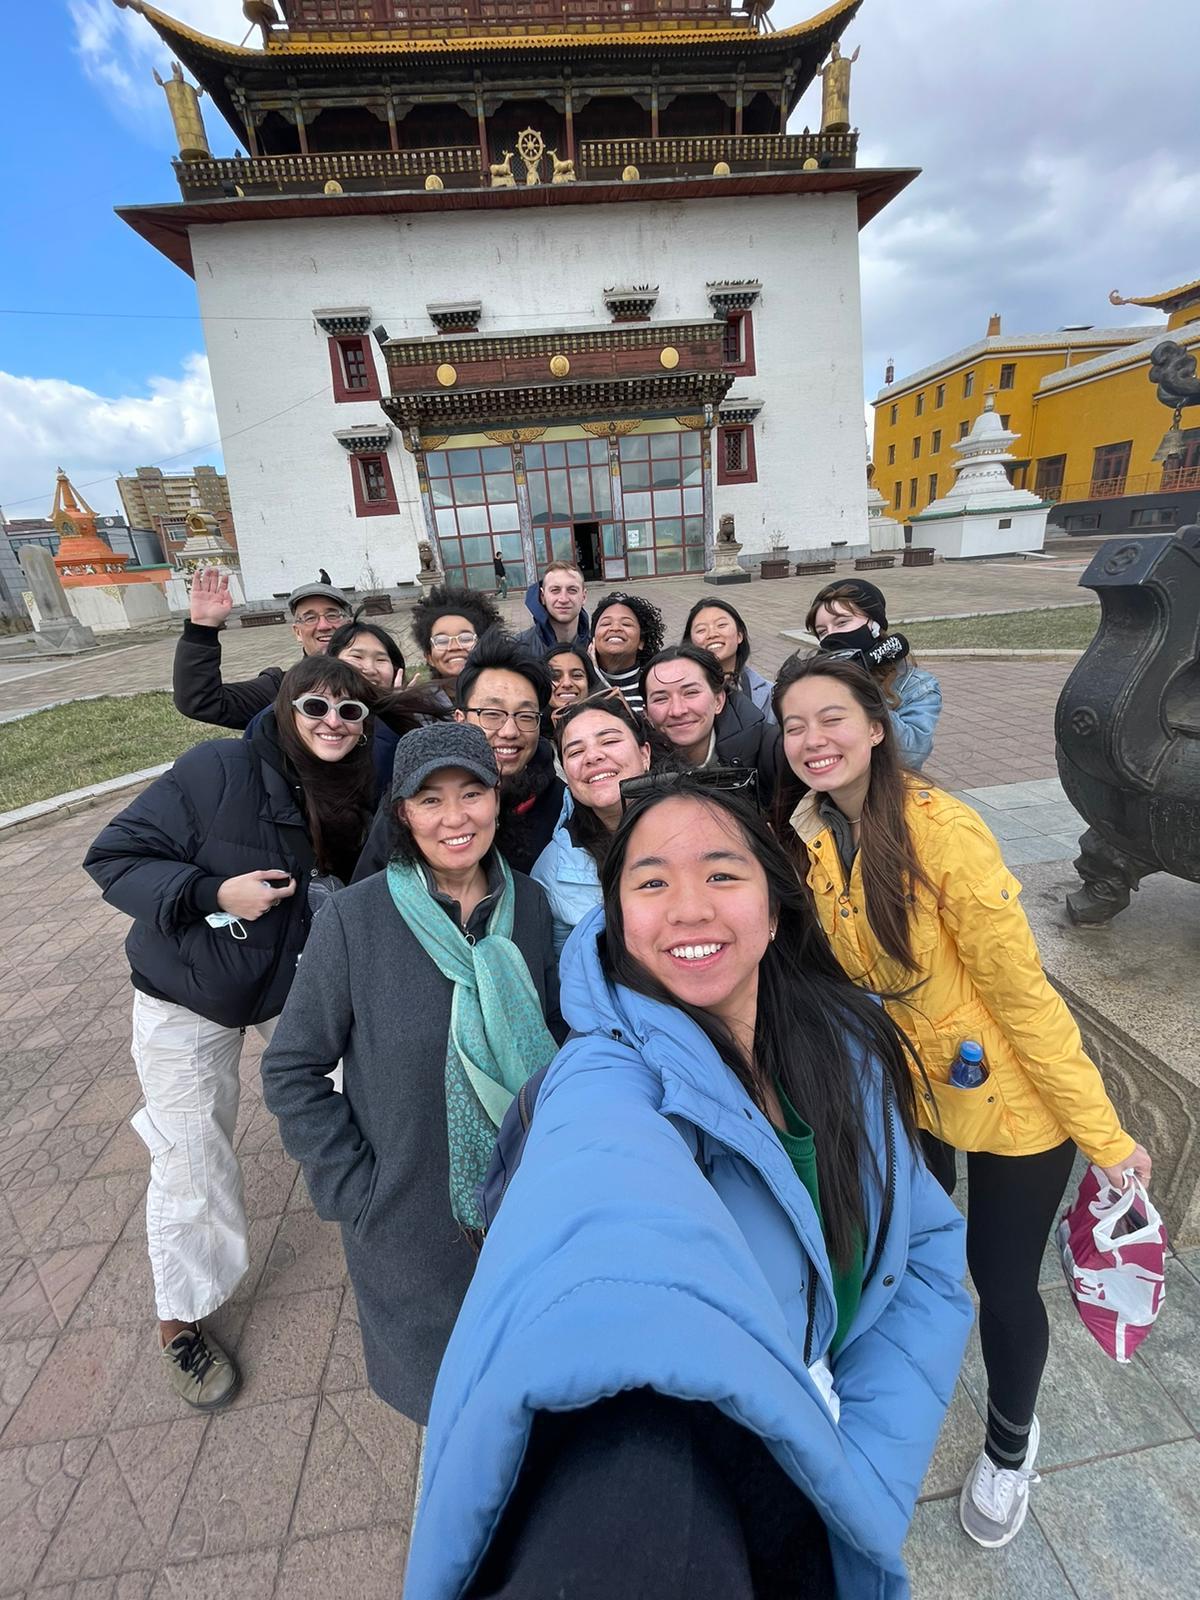 Students take a selfie in front of a temple in Ulaanbaatar, Mongolia